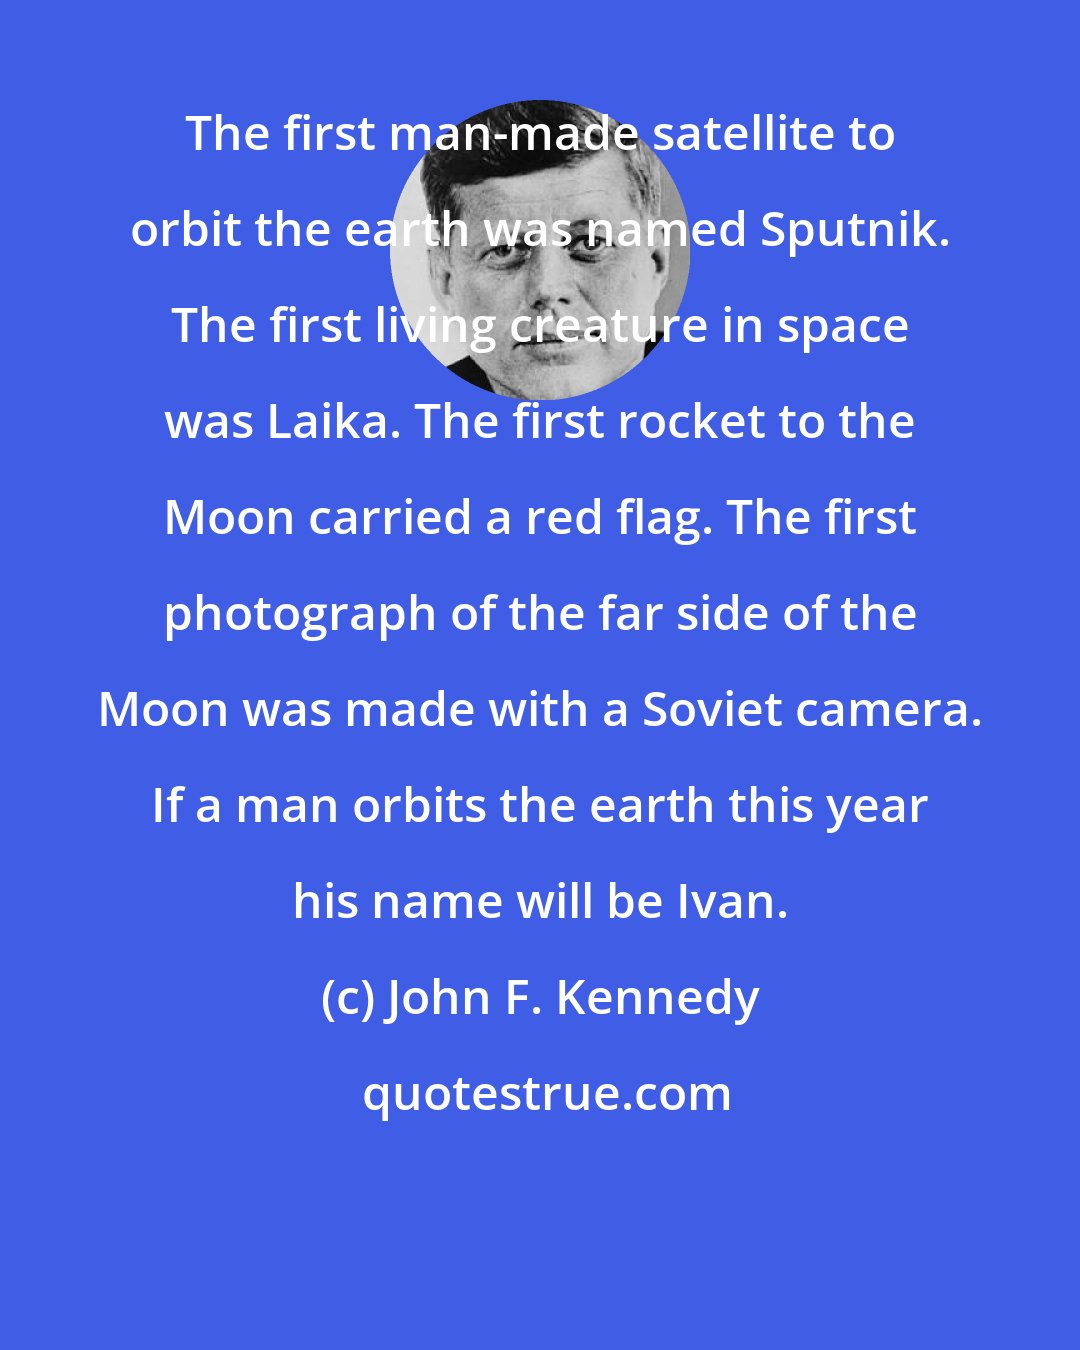 John F. Kennedy: The first man-made satellite to orbit the earth was named Sputnik. The first living creature in space was Laika. The first rocket to the Moon carried a red flag. The first photograph of the far side of the Moon was made with a Soviet camera. If a man orbits the earth this year his name will be Ivan.